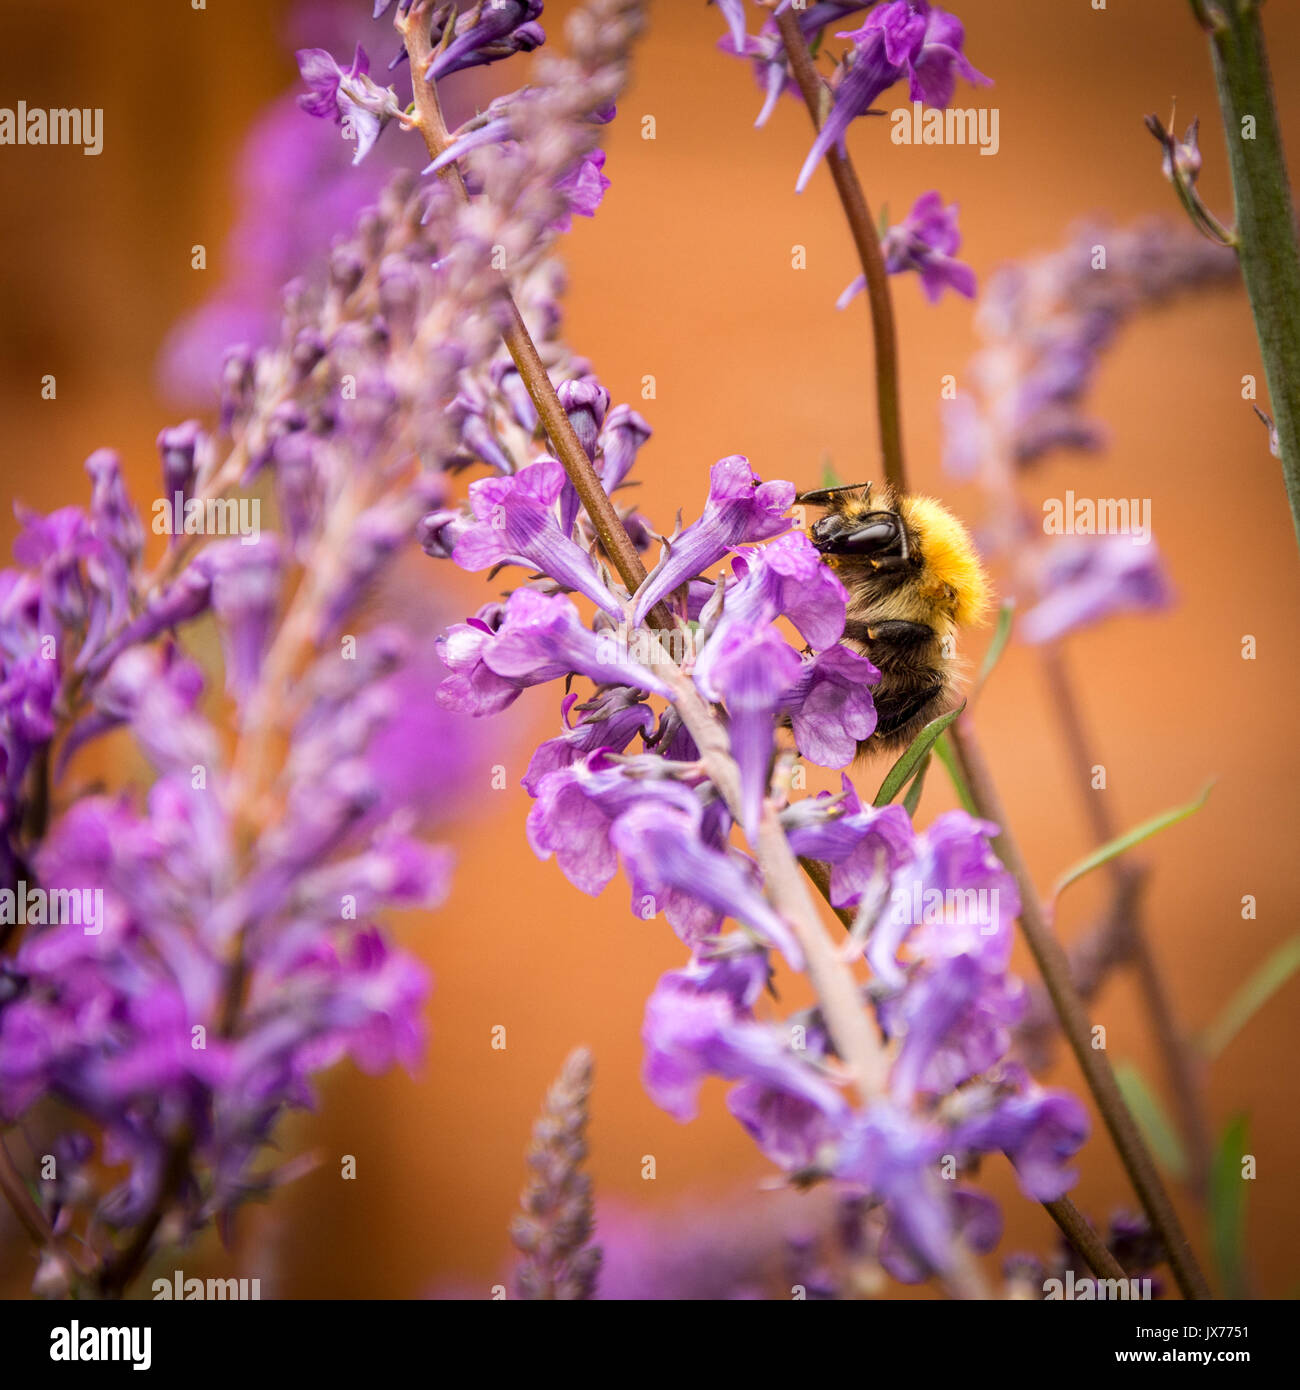 Close up of a Buff Tailed Bumble Bee pollinating during spring, UK, 2017 Stock Photo